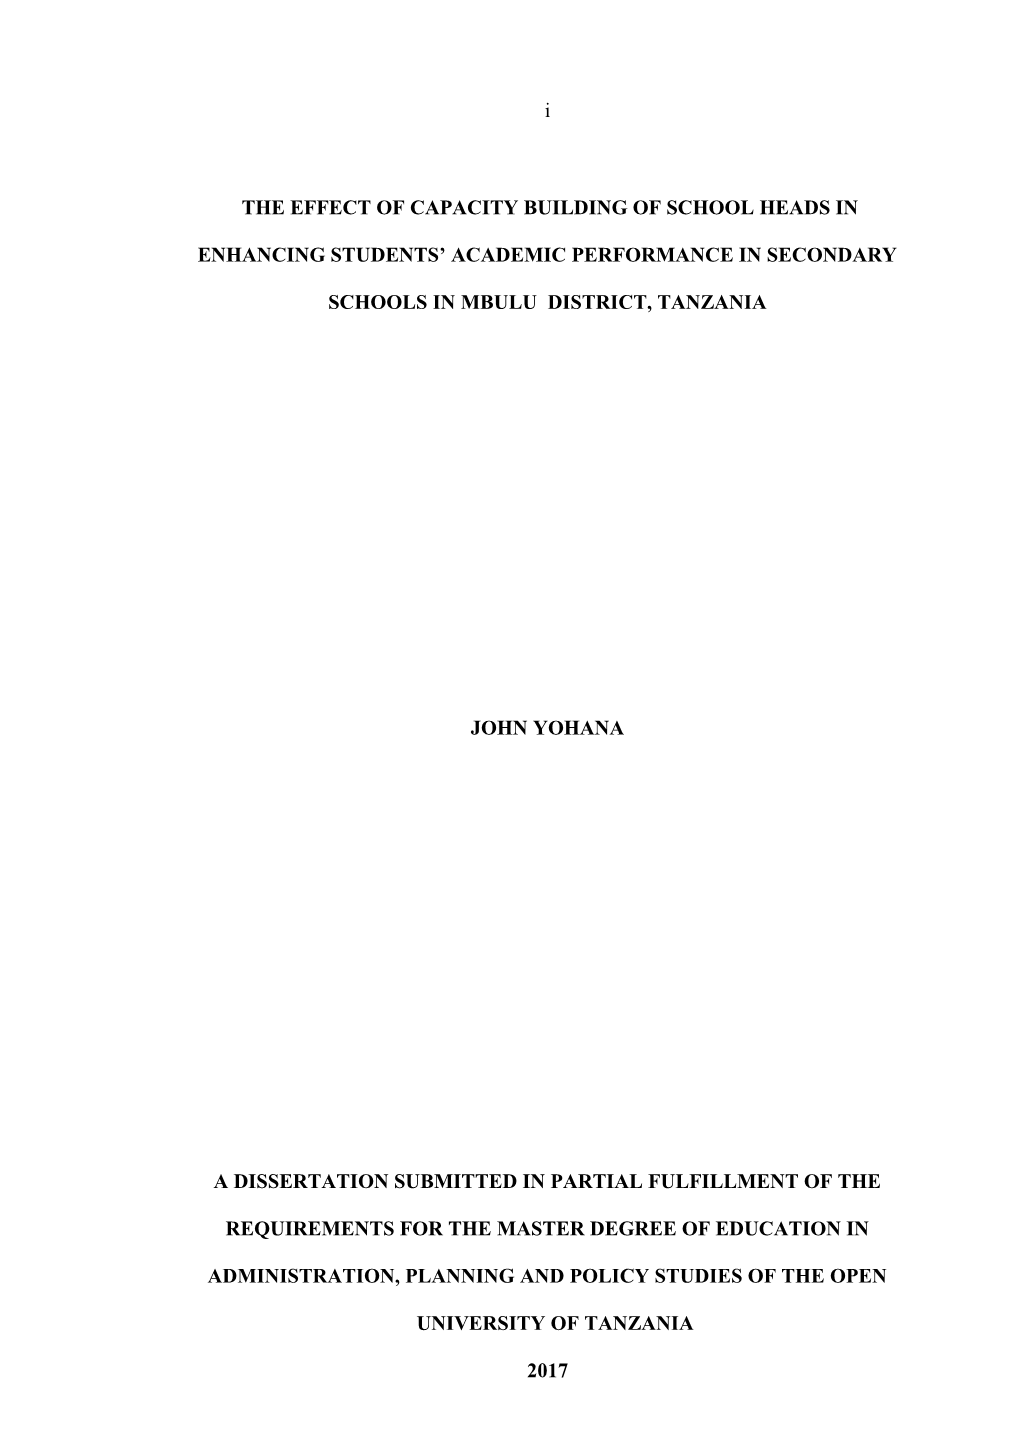 A Dissertation Submitted in Partial Fulfillment of the Requirements for the Master Degree